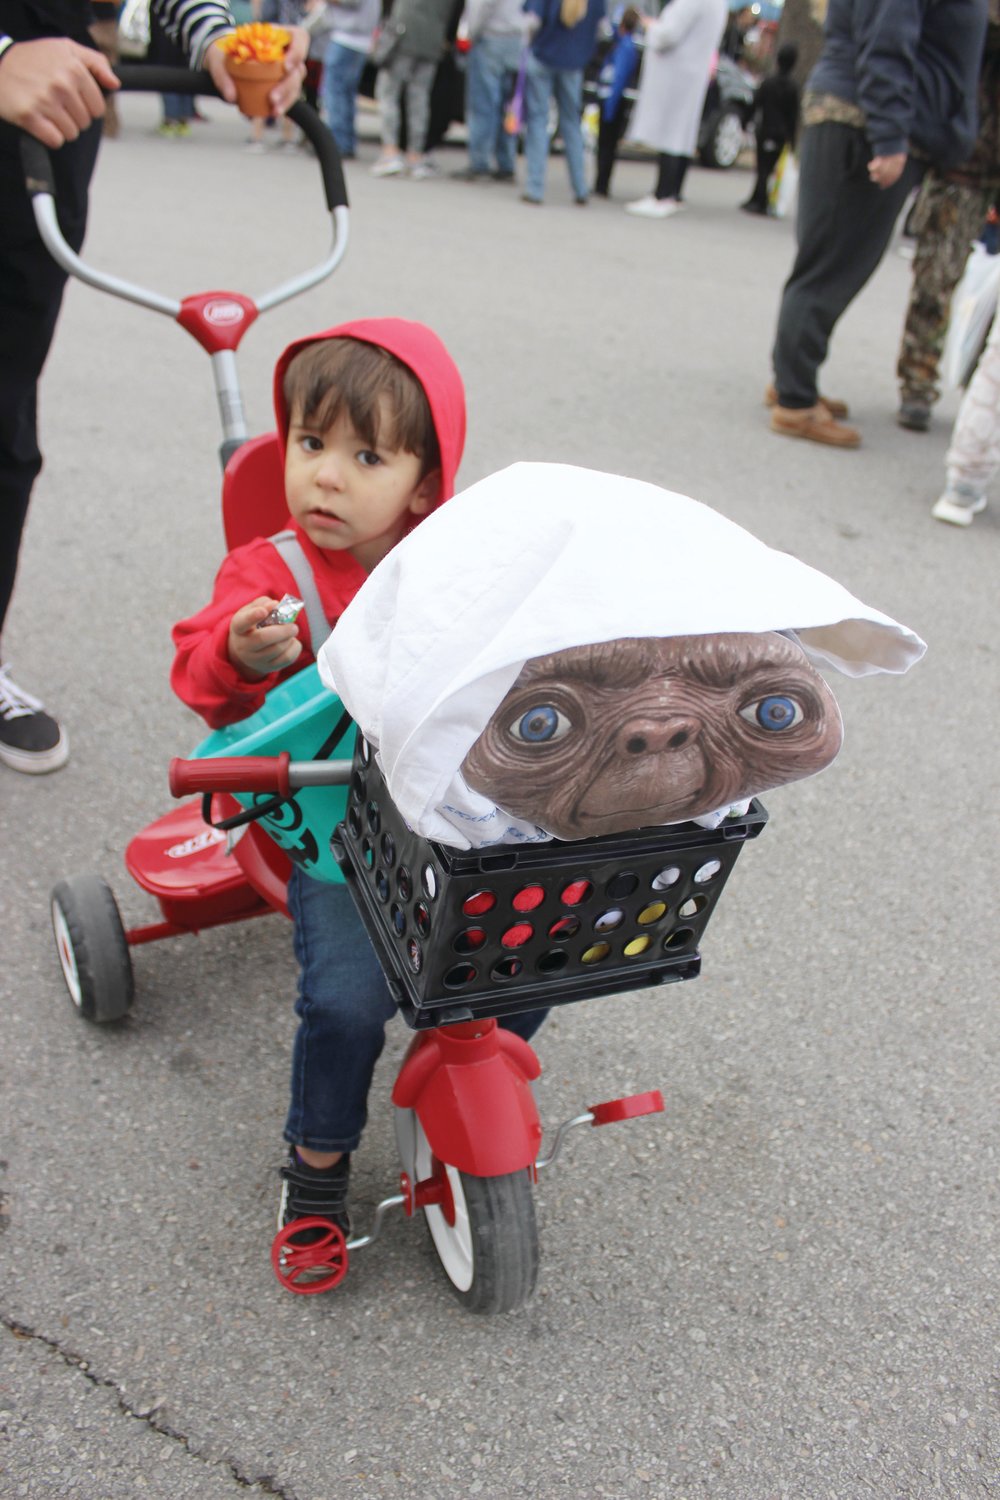 Young Thatcher Felton pedals his tricycle around the square with ET in his basket.